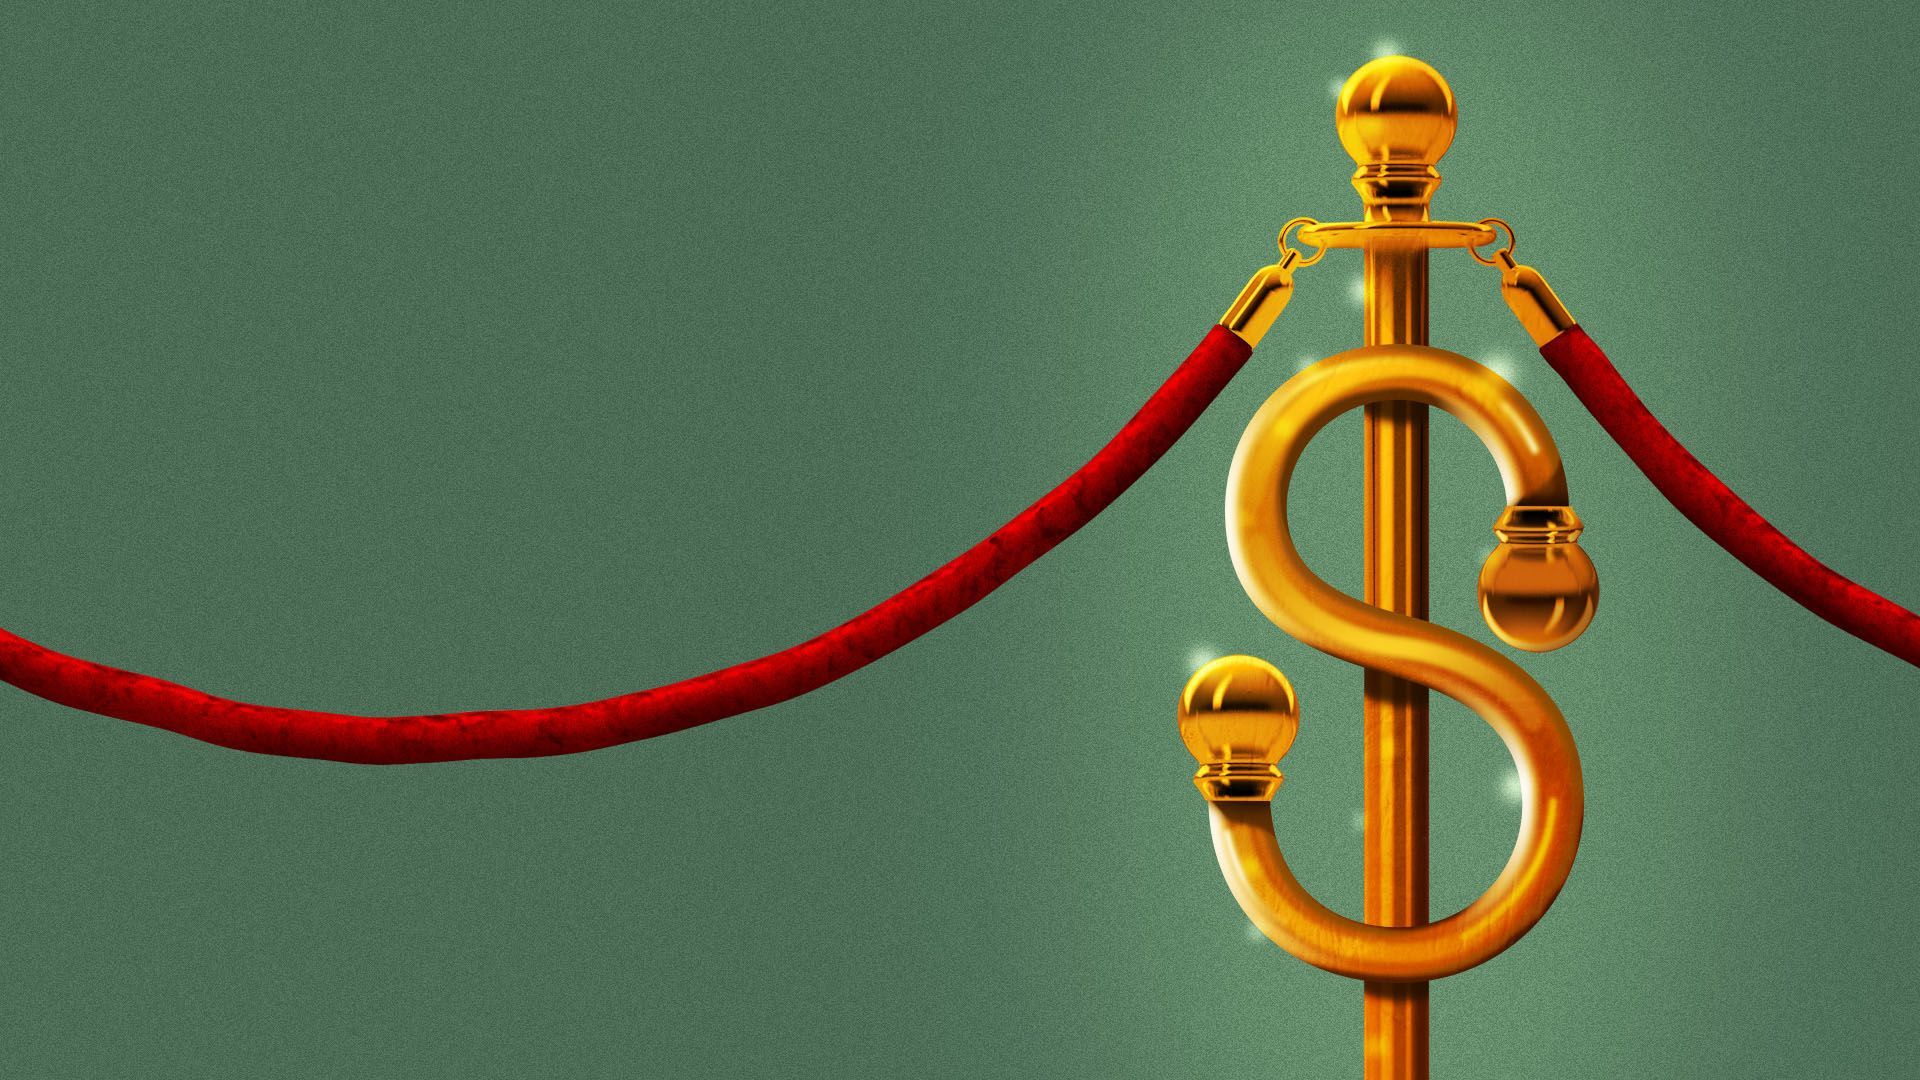 Illustration of a red velvet rope with a stanchion in the form of a dollar sign